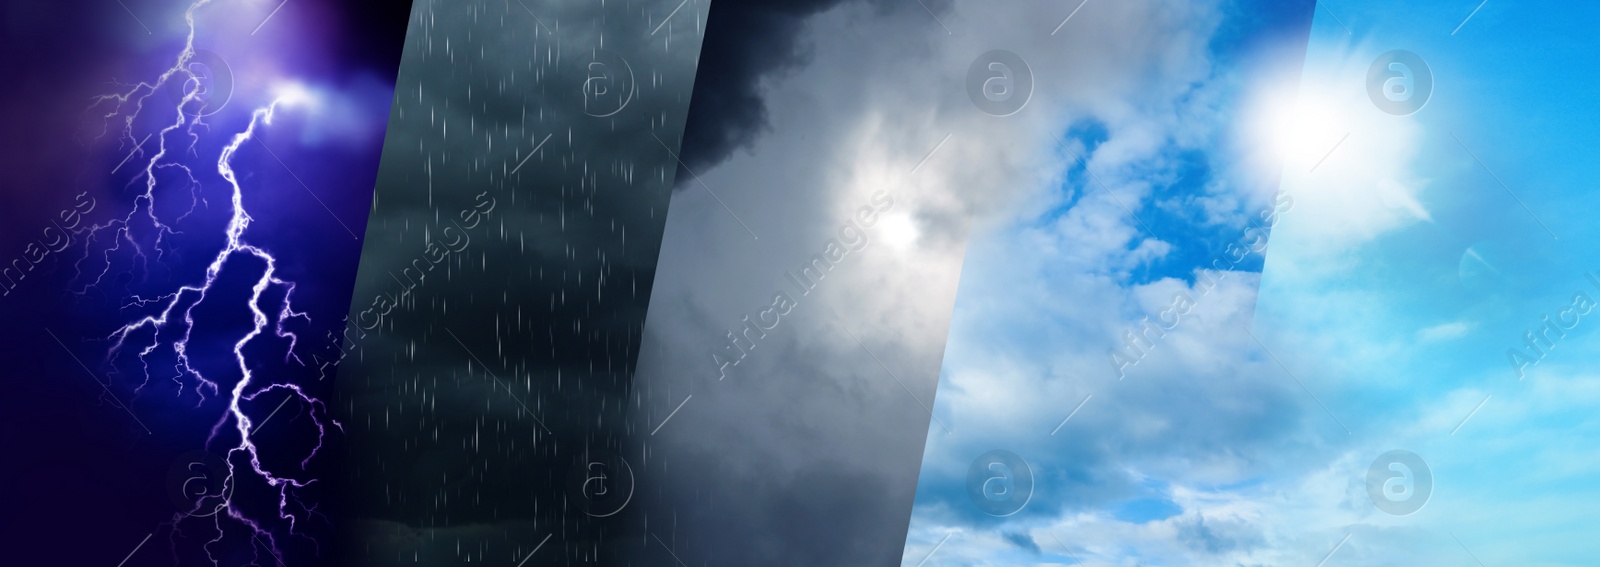 Image of Photos of sky in collage, banner design. Different weather